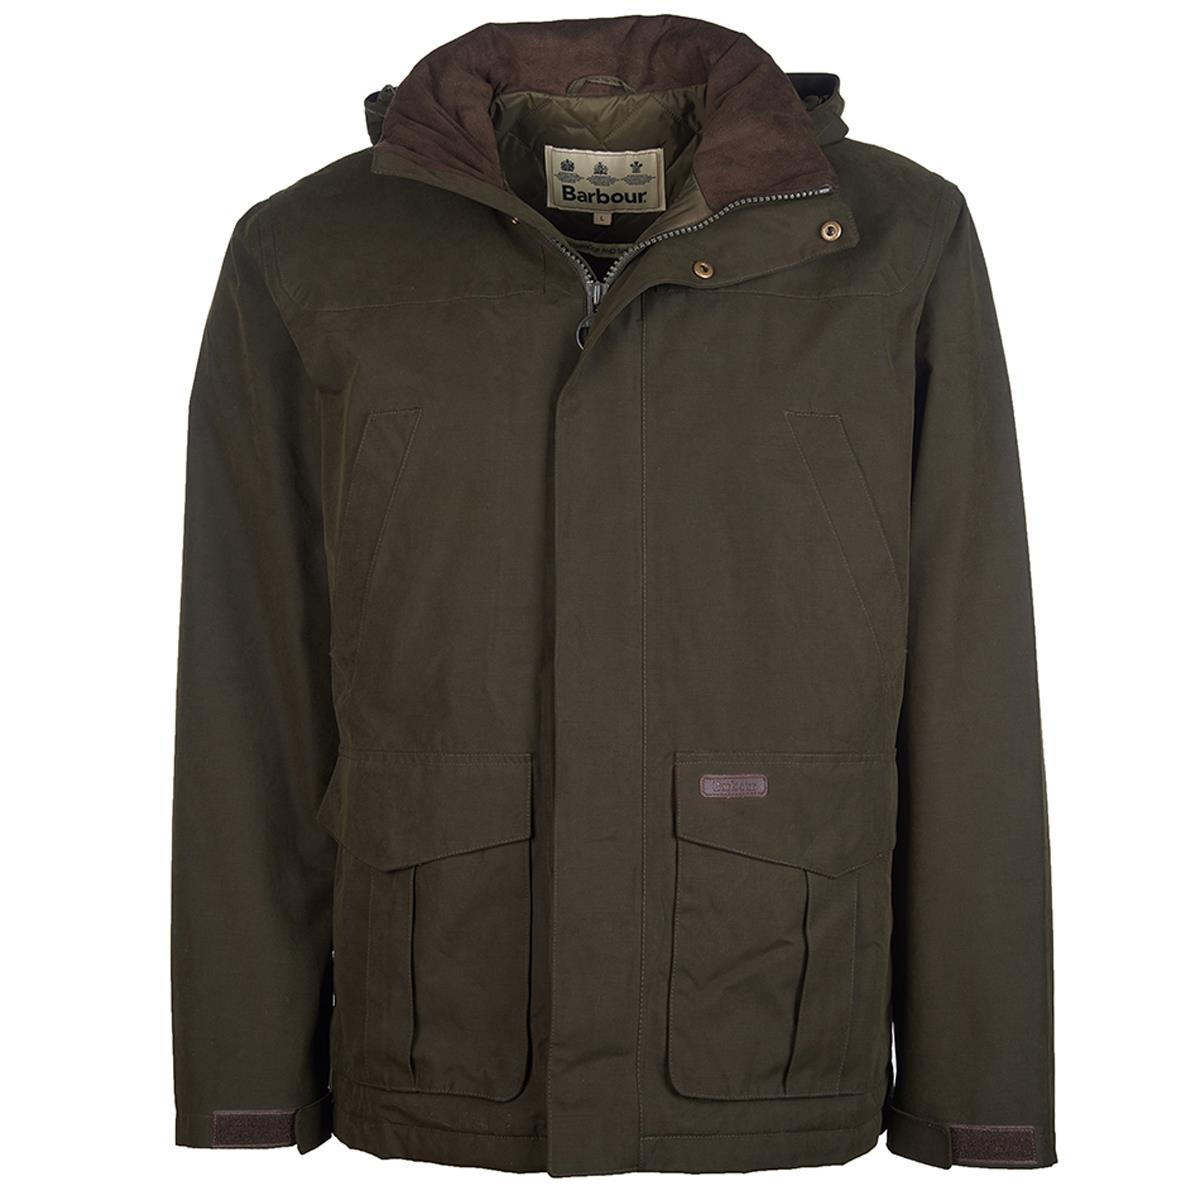 Barbour Mens Brockstone Jacket Questions & Answers